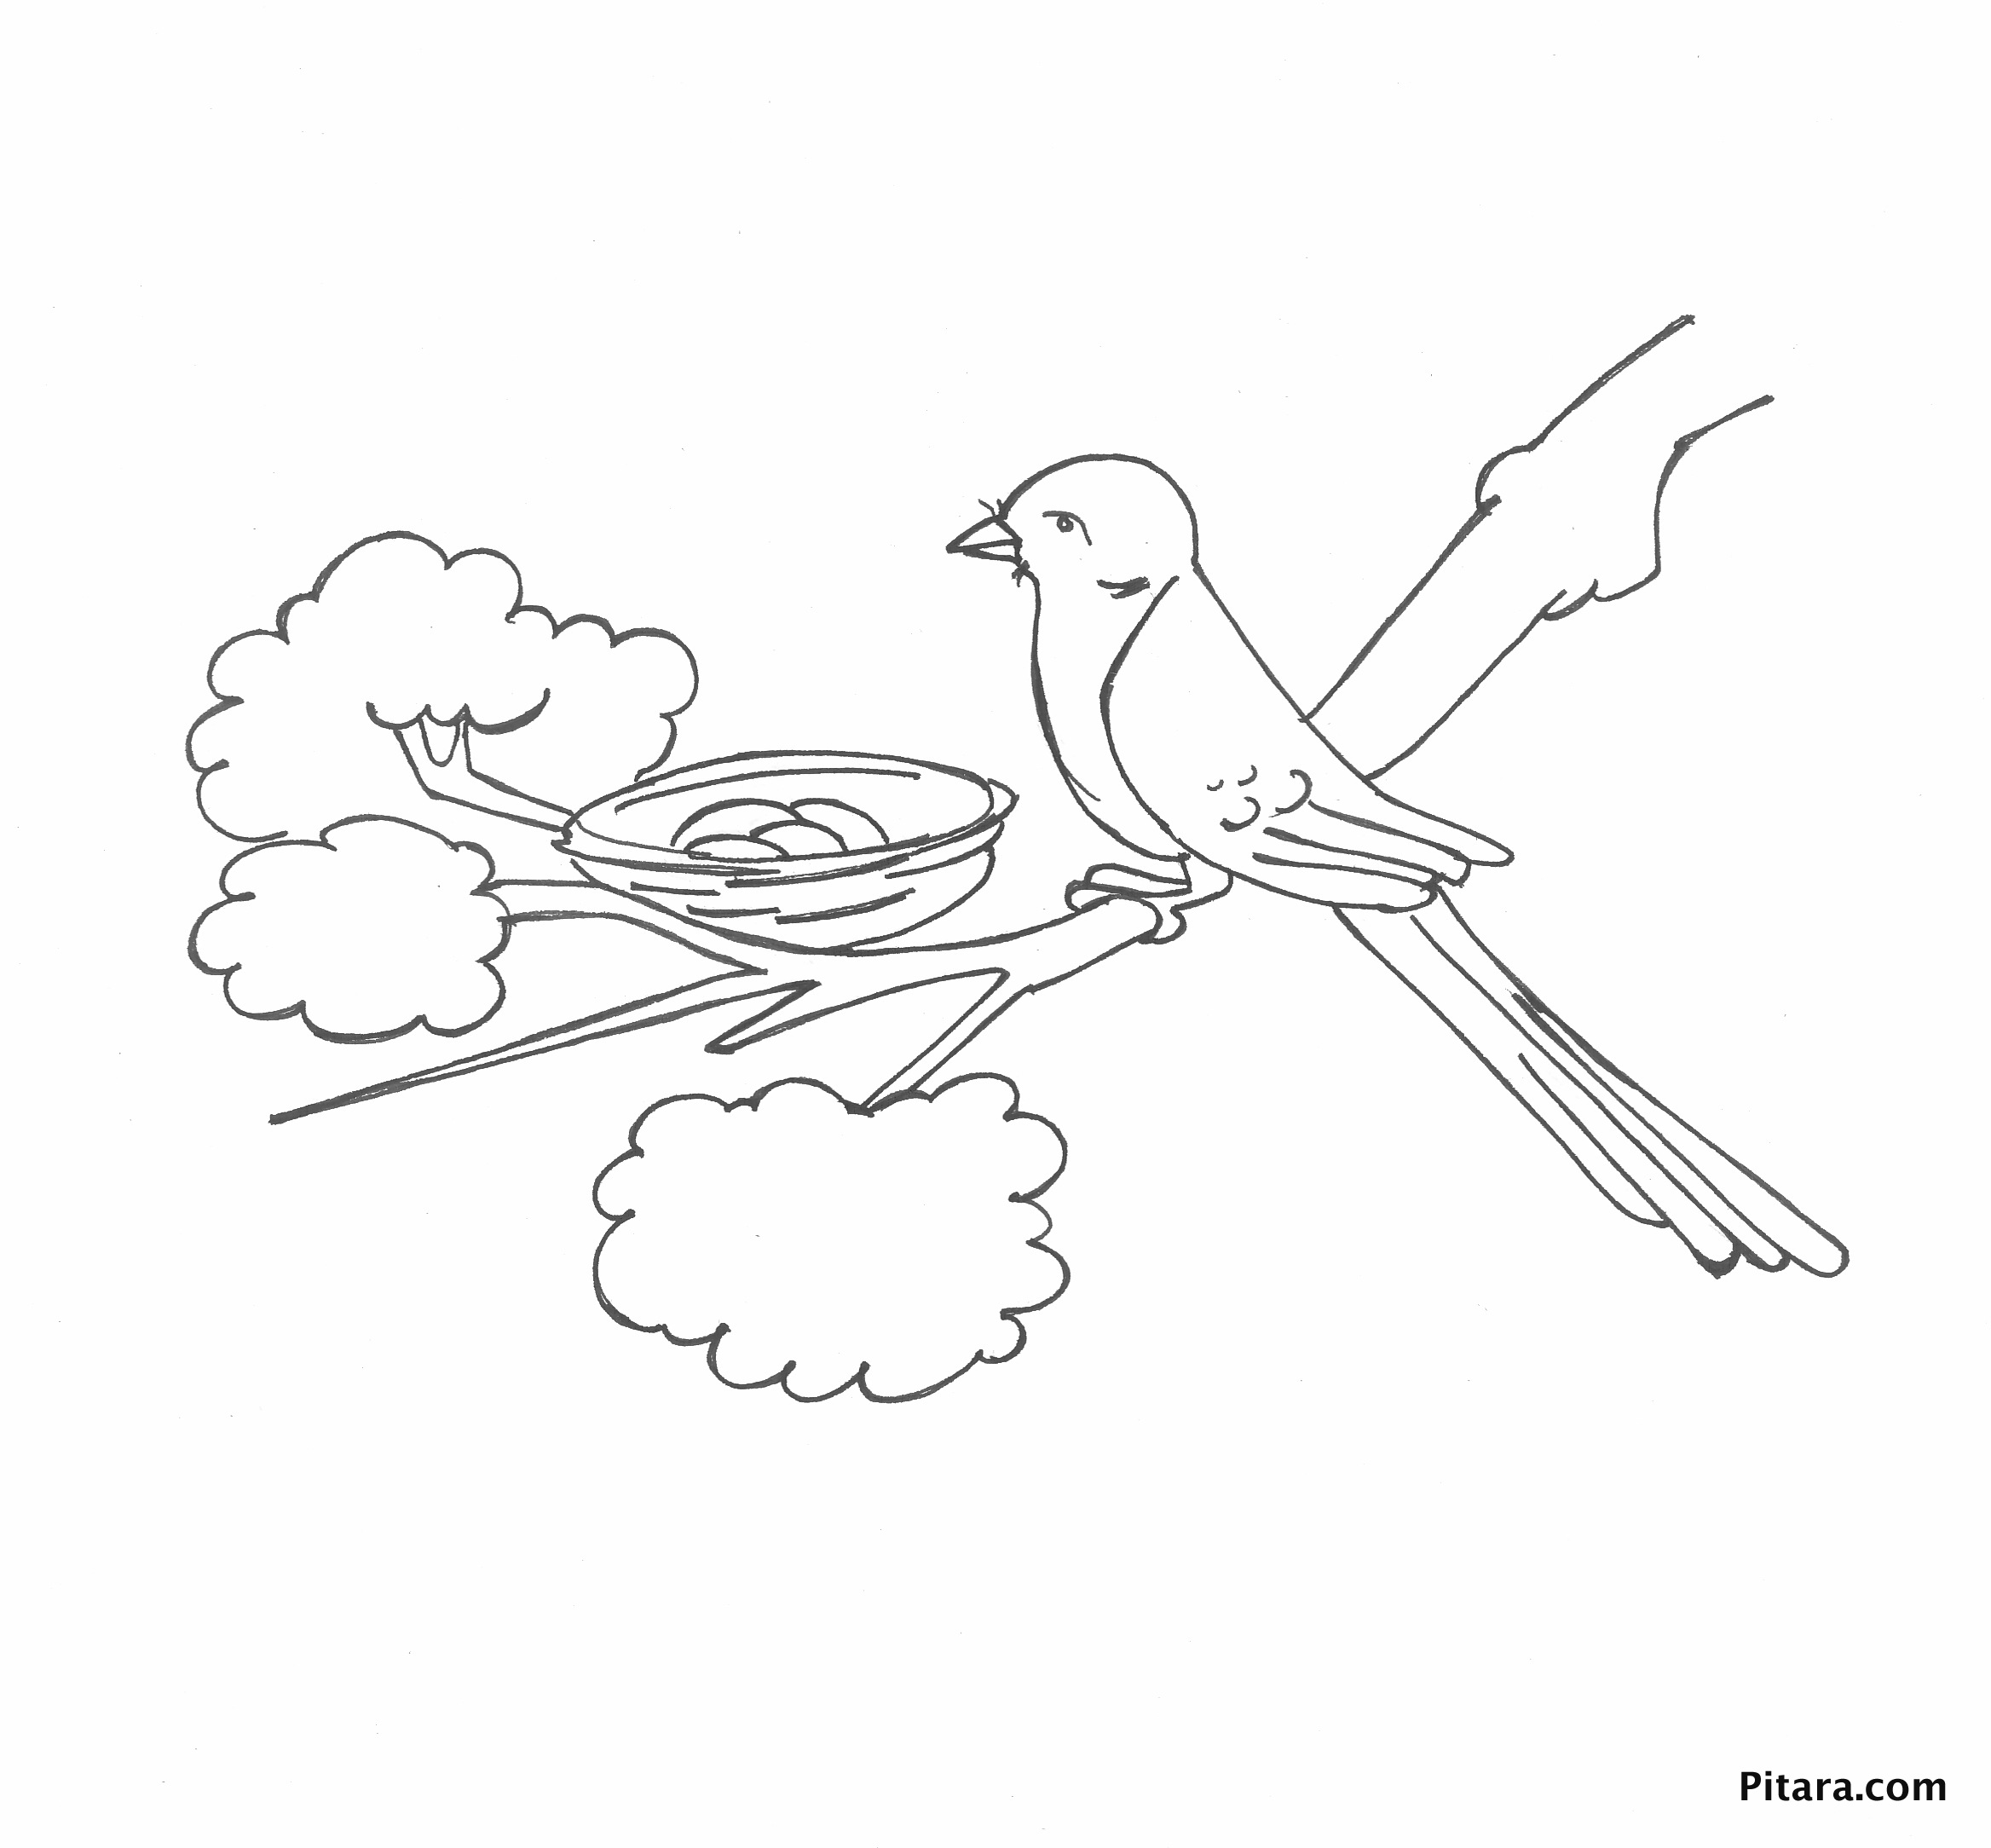 Bird in the nest – Coloring page – Pitara Kids Network